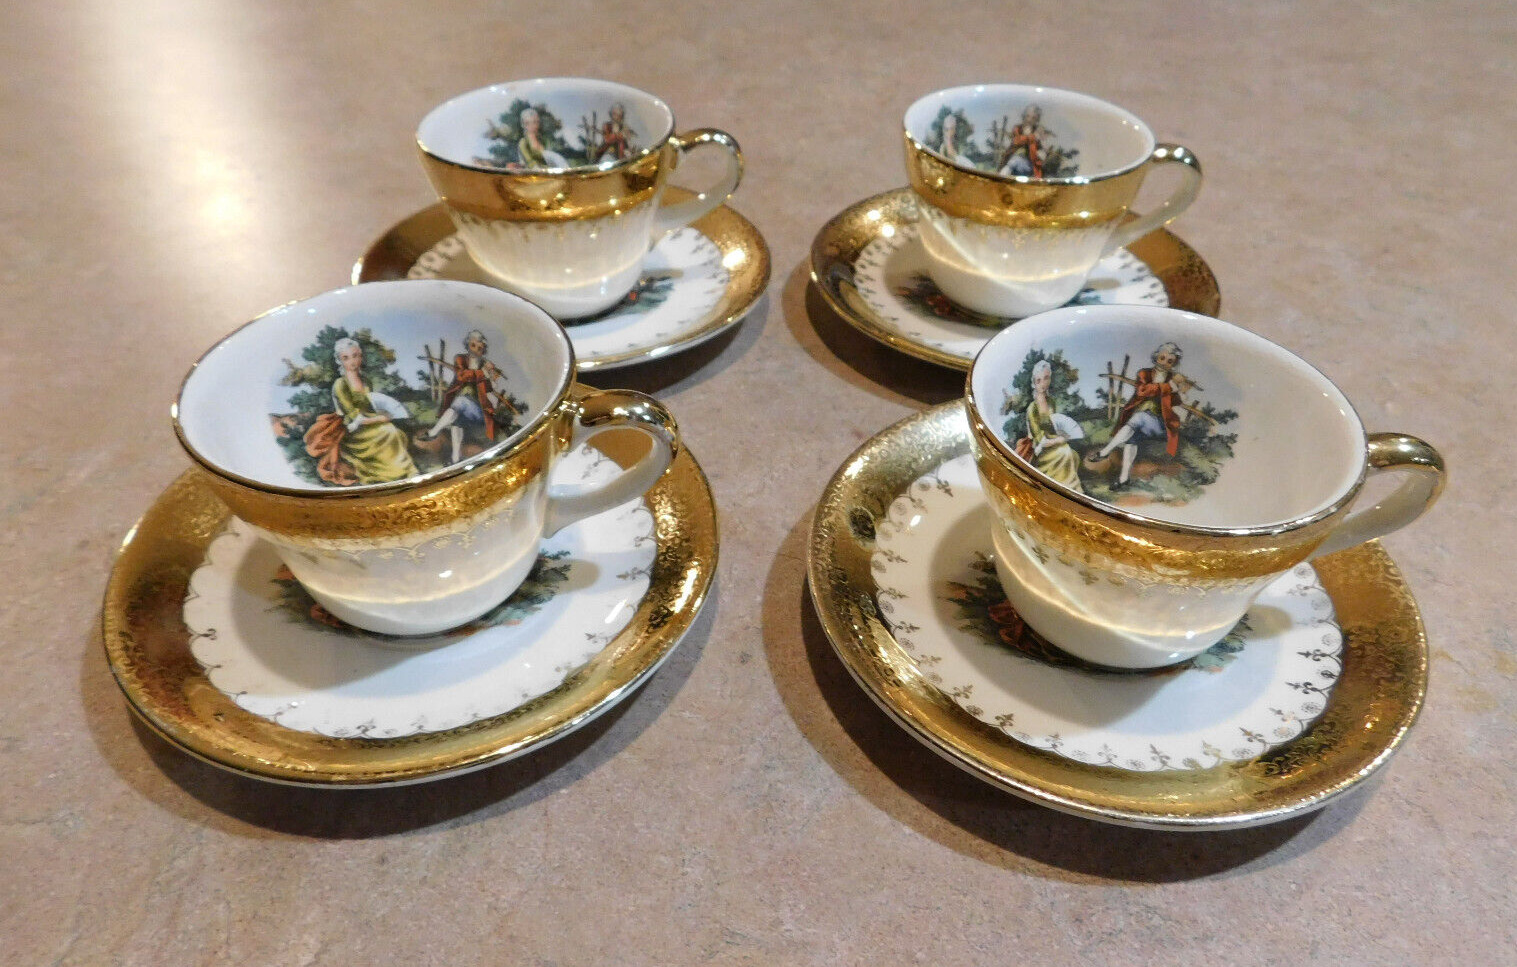 Eastern China USA colonial couple 22k demitasse cup and saucer set of 4